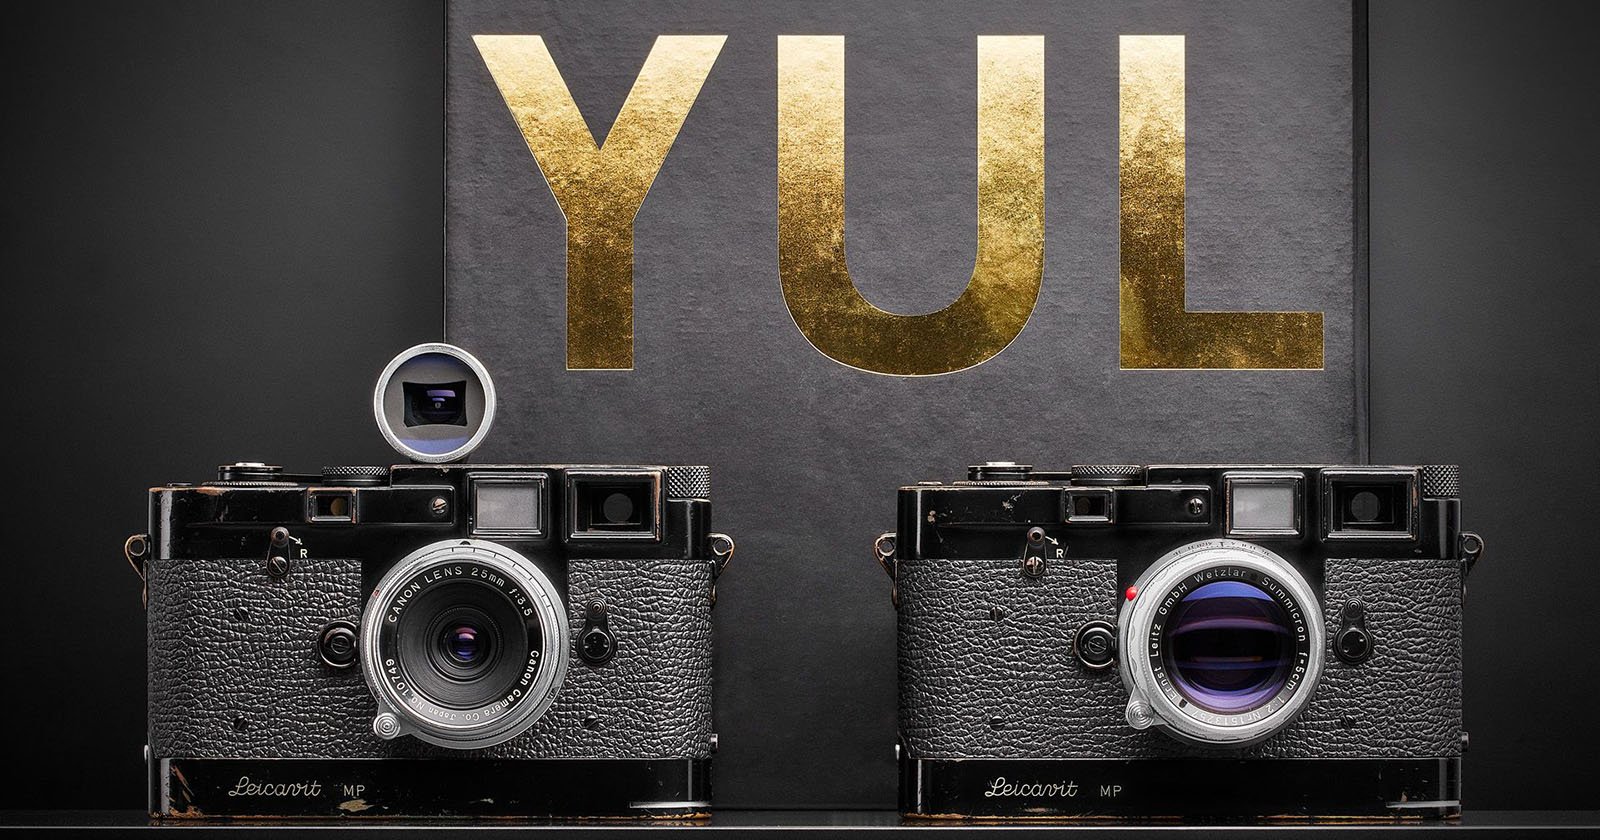 Yul Brynners Leica MP Cameras Sell for More Than $3 Million